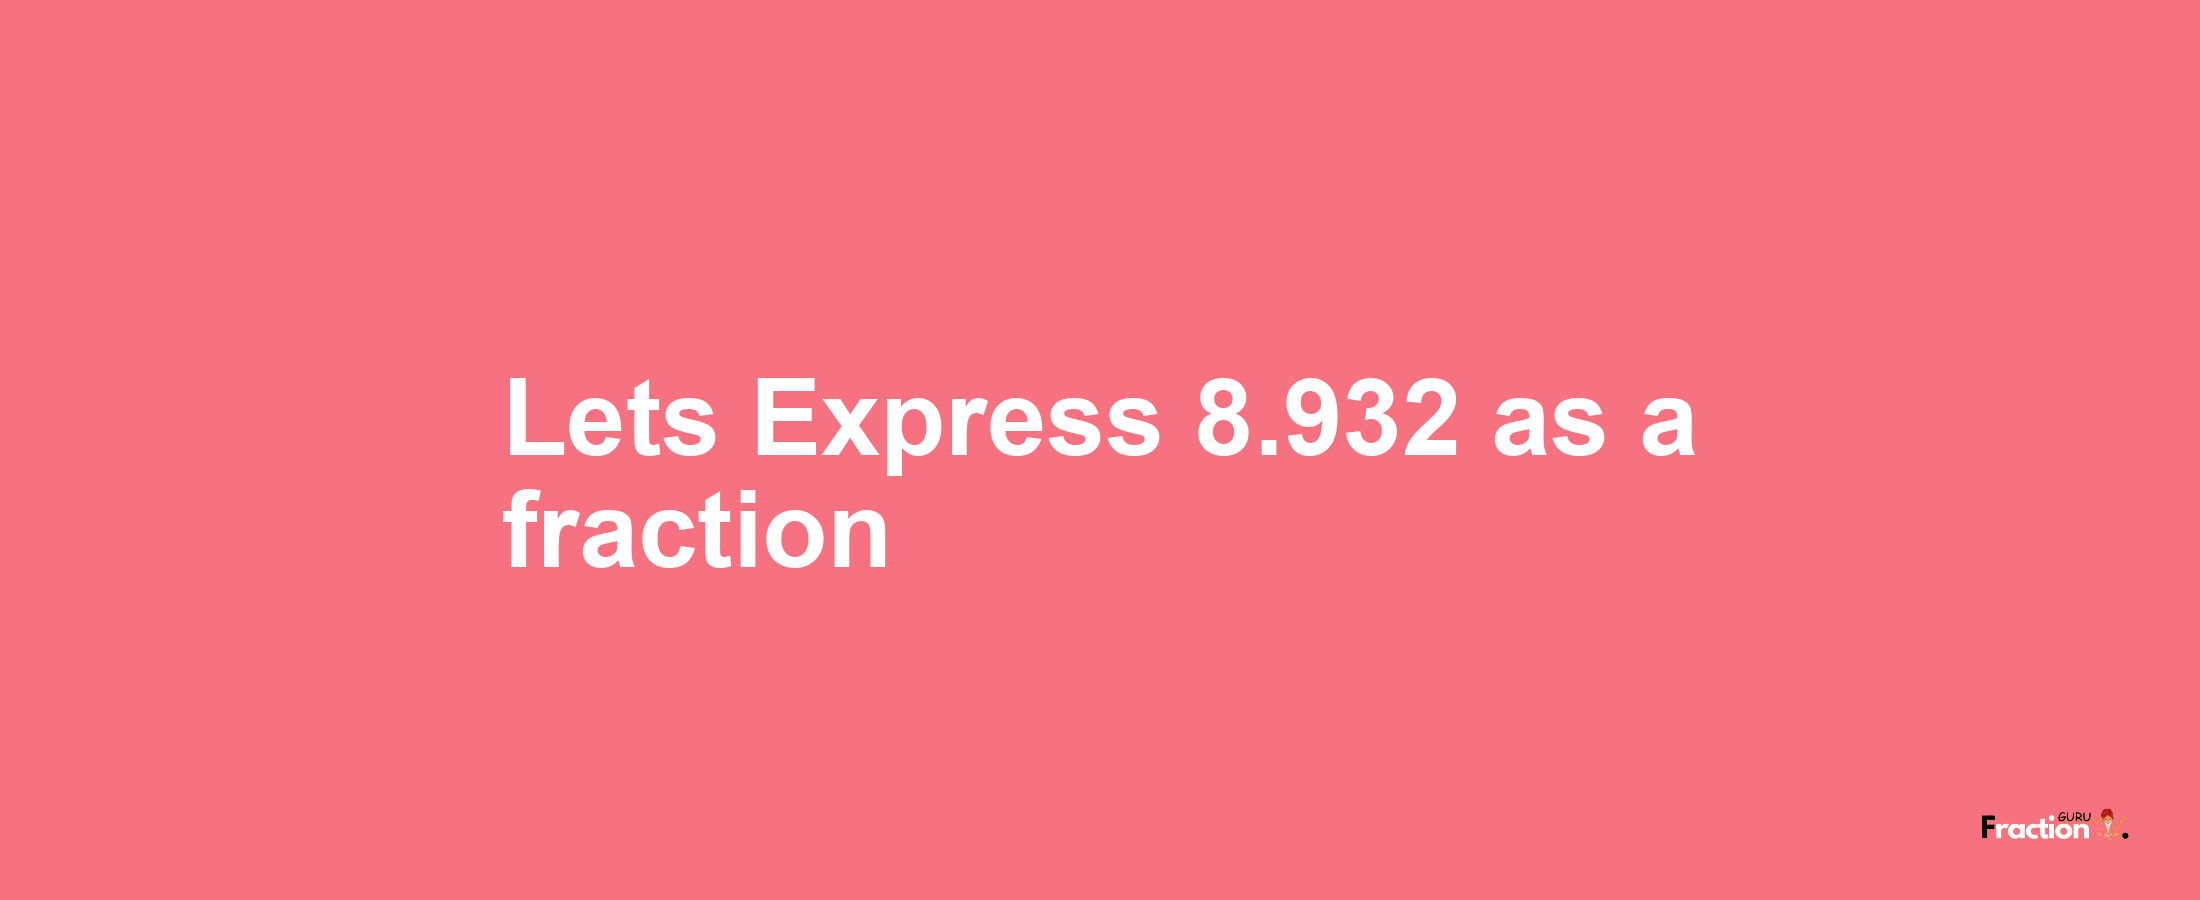 Lets Express 8.932 as afraction